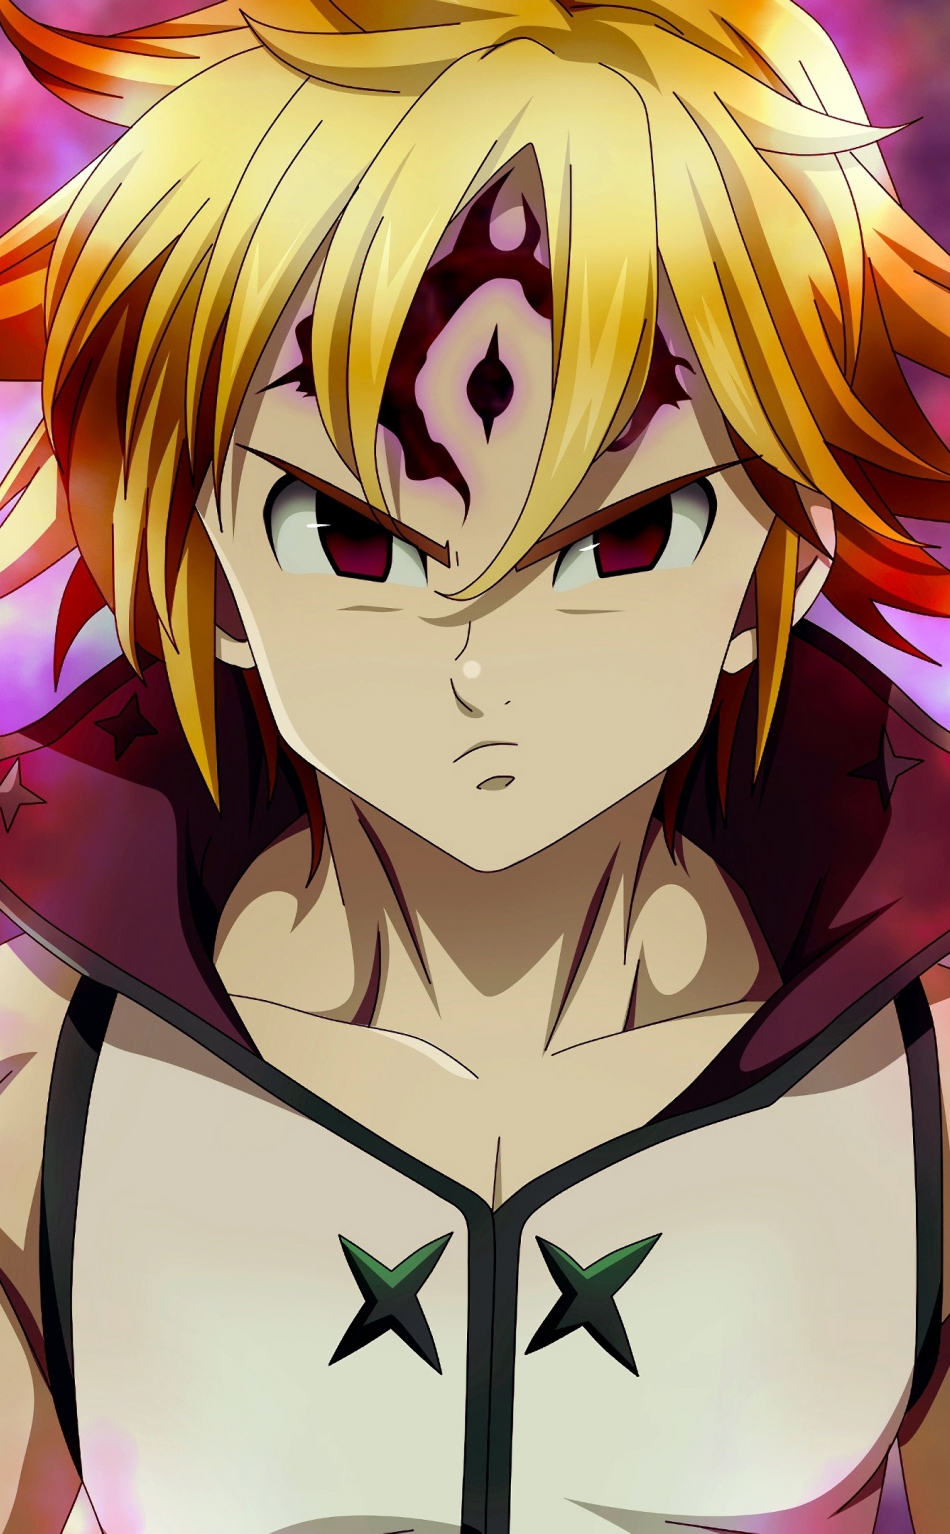 Download wallpaper 950x1534 angry, anime boy, meliodas, iphone, 950x1534 hd  background, 10164